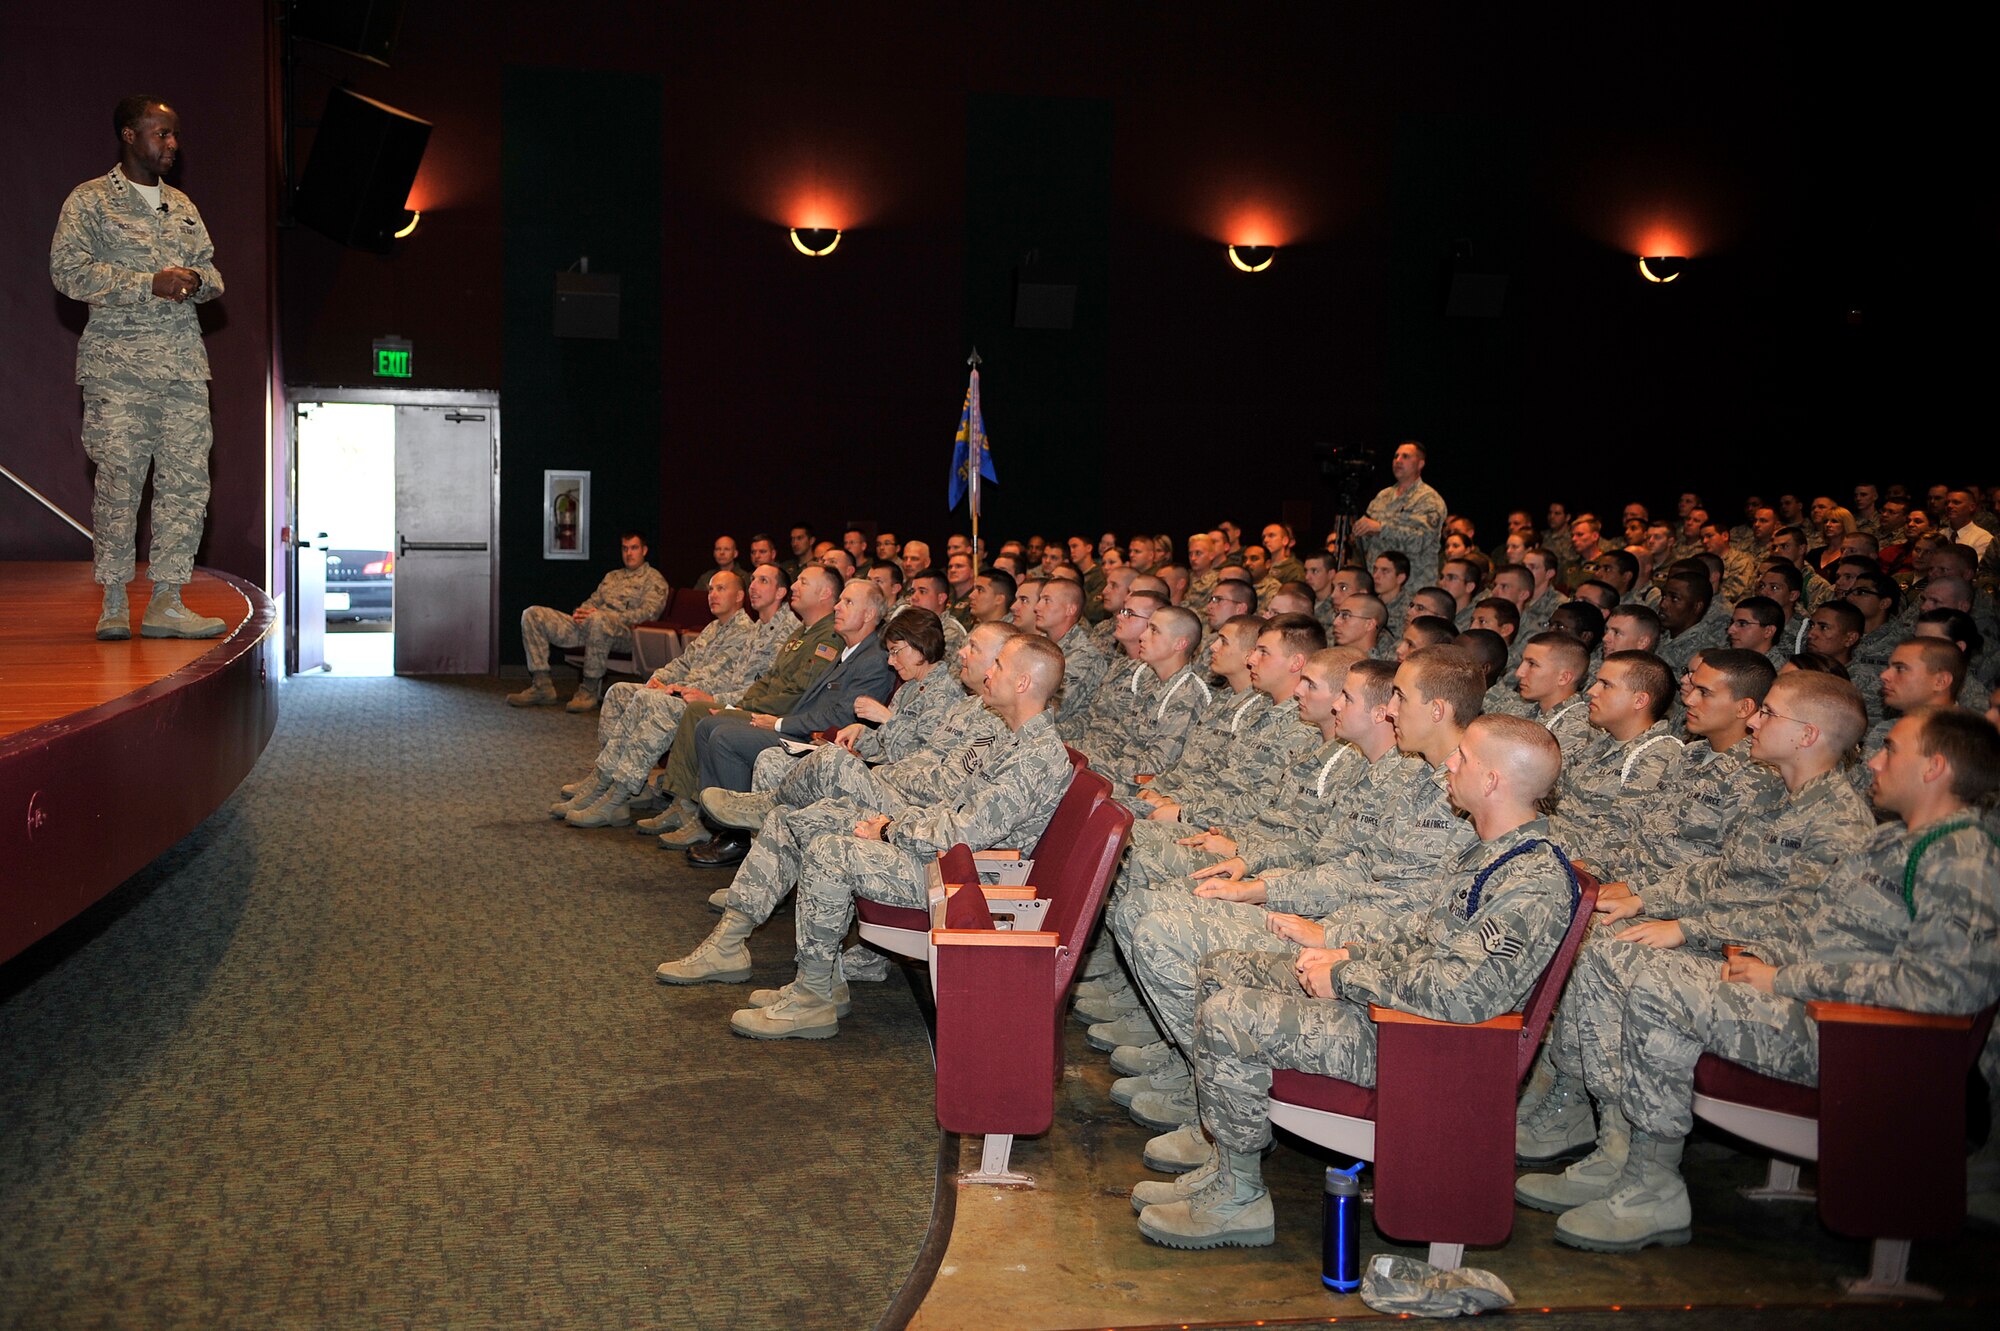 VANDENBERG AIR FORCE BASE, Calif. -- Gen. Edward Rice Jr., Air Force Education and Training Command commander, speaks to the 381st Training Group during a commander's call at the base theater here Friday, Aug. 31, 2011.  (U.S. Air Force photo/Staff Sgt. Andrew Satran) 

 